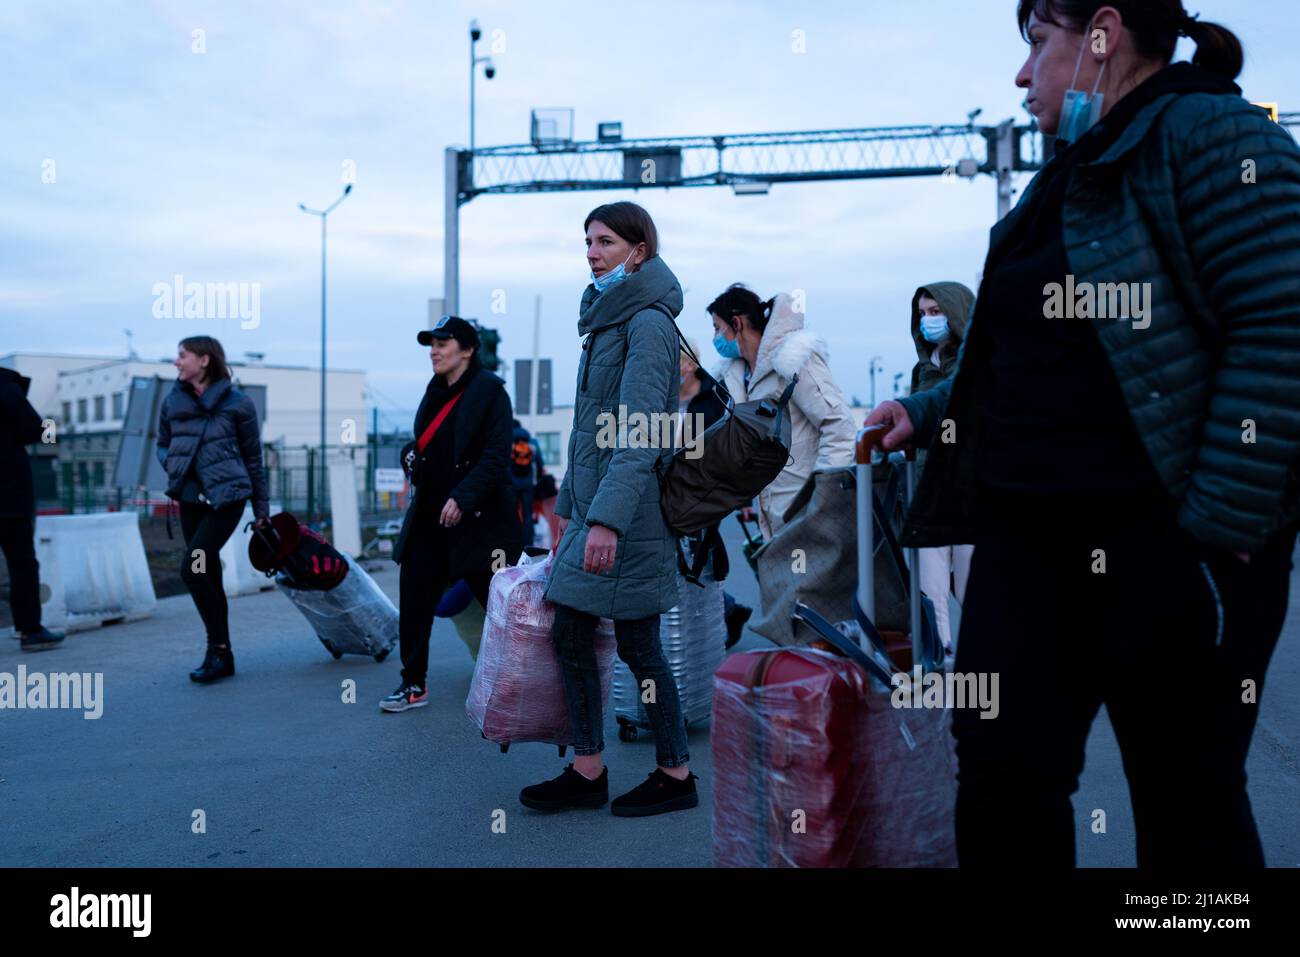 Ukrainian refugees carrying suitcases pass through a border crossing between Poland and Ukraine as they flee the intensifying war in Ukraine, their ho Stock Photo